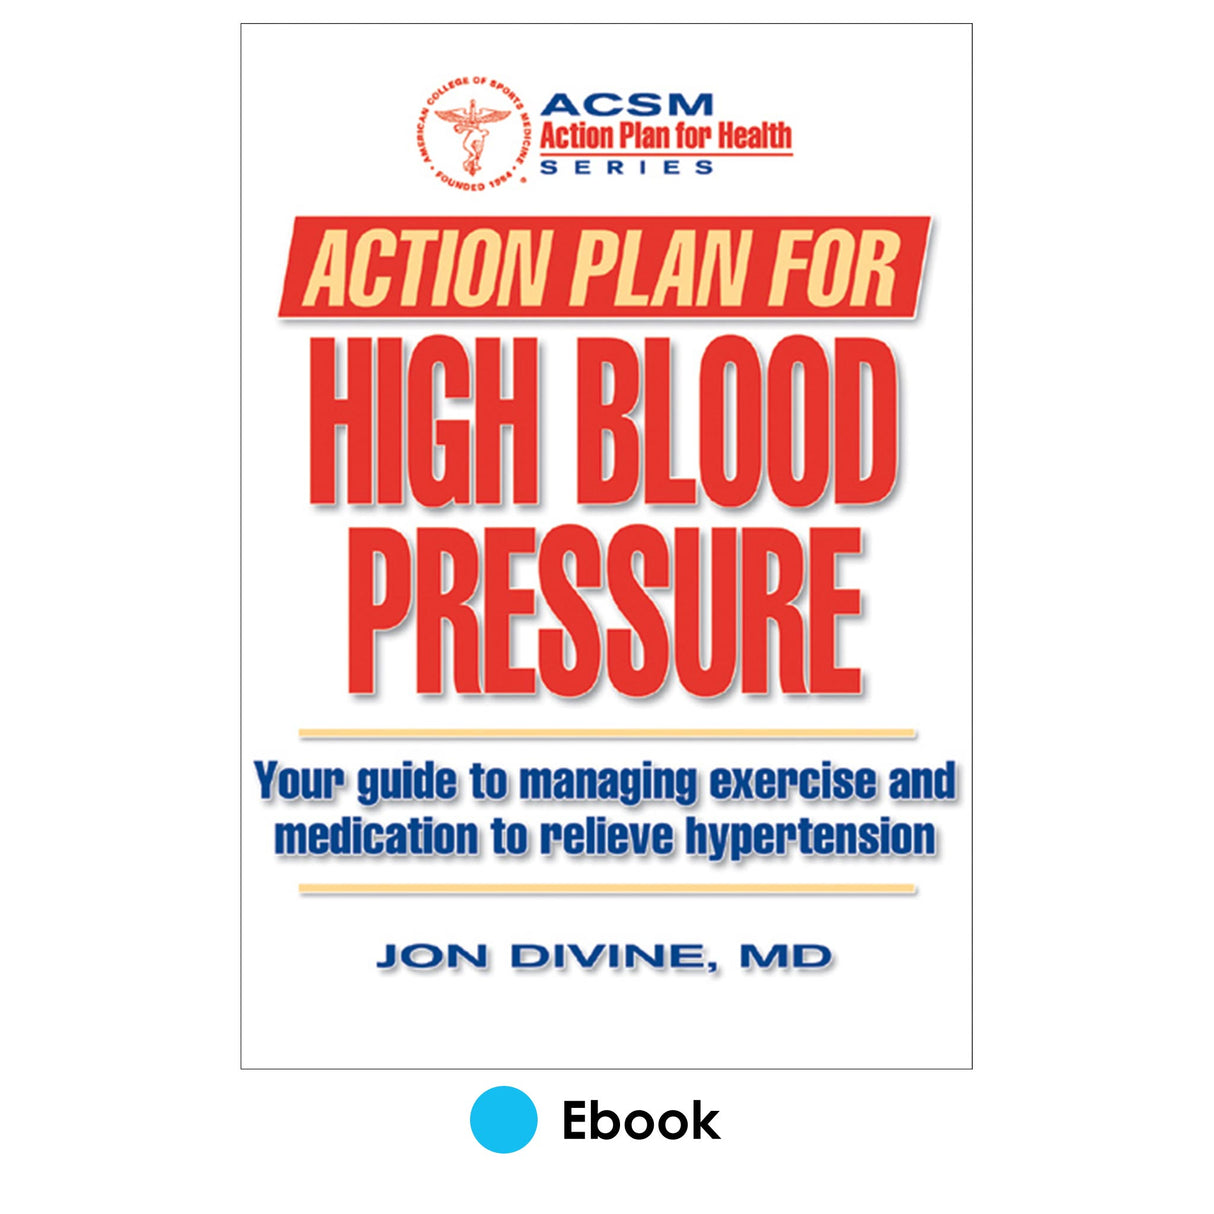 Action Plan for High Blood Pressure PDF